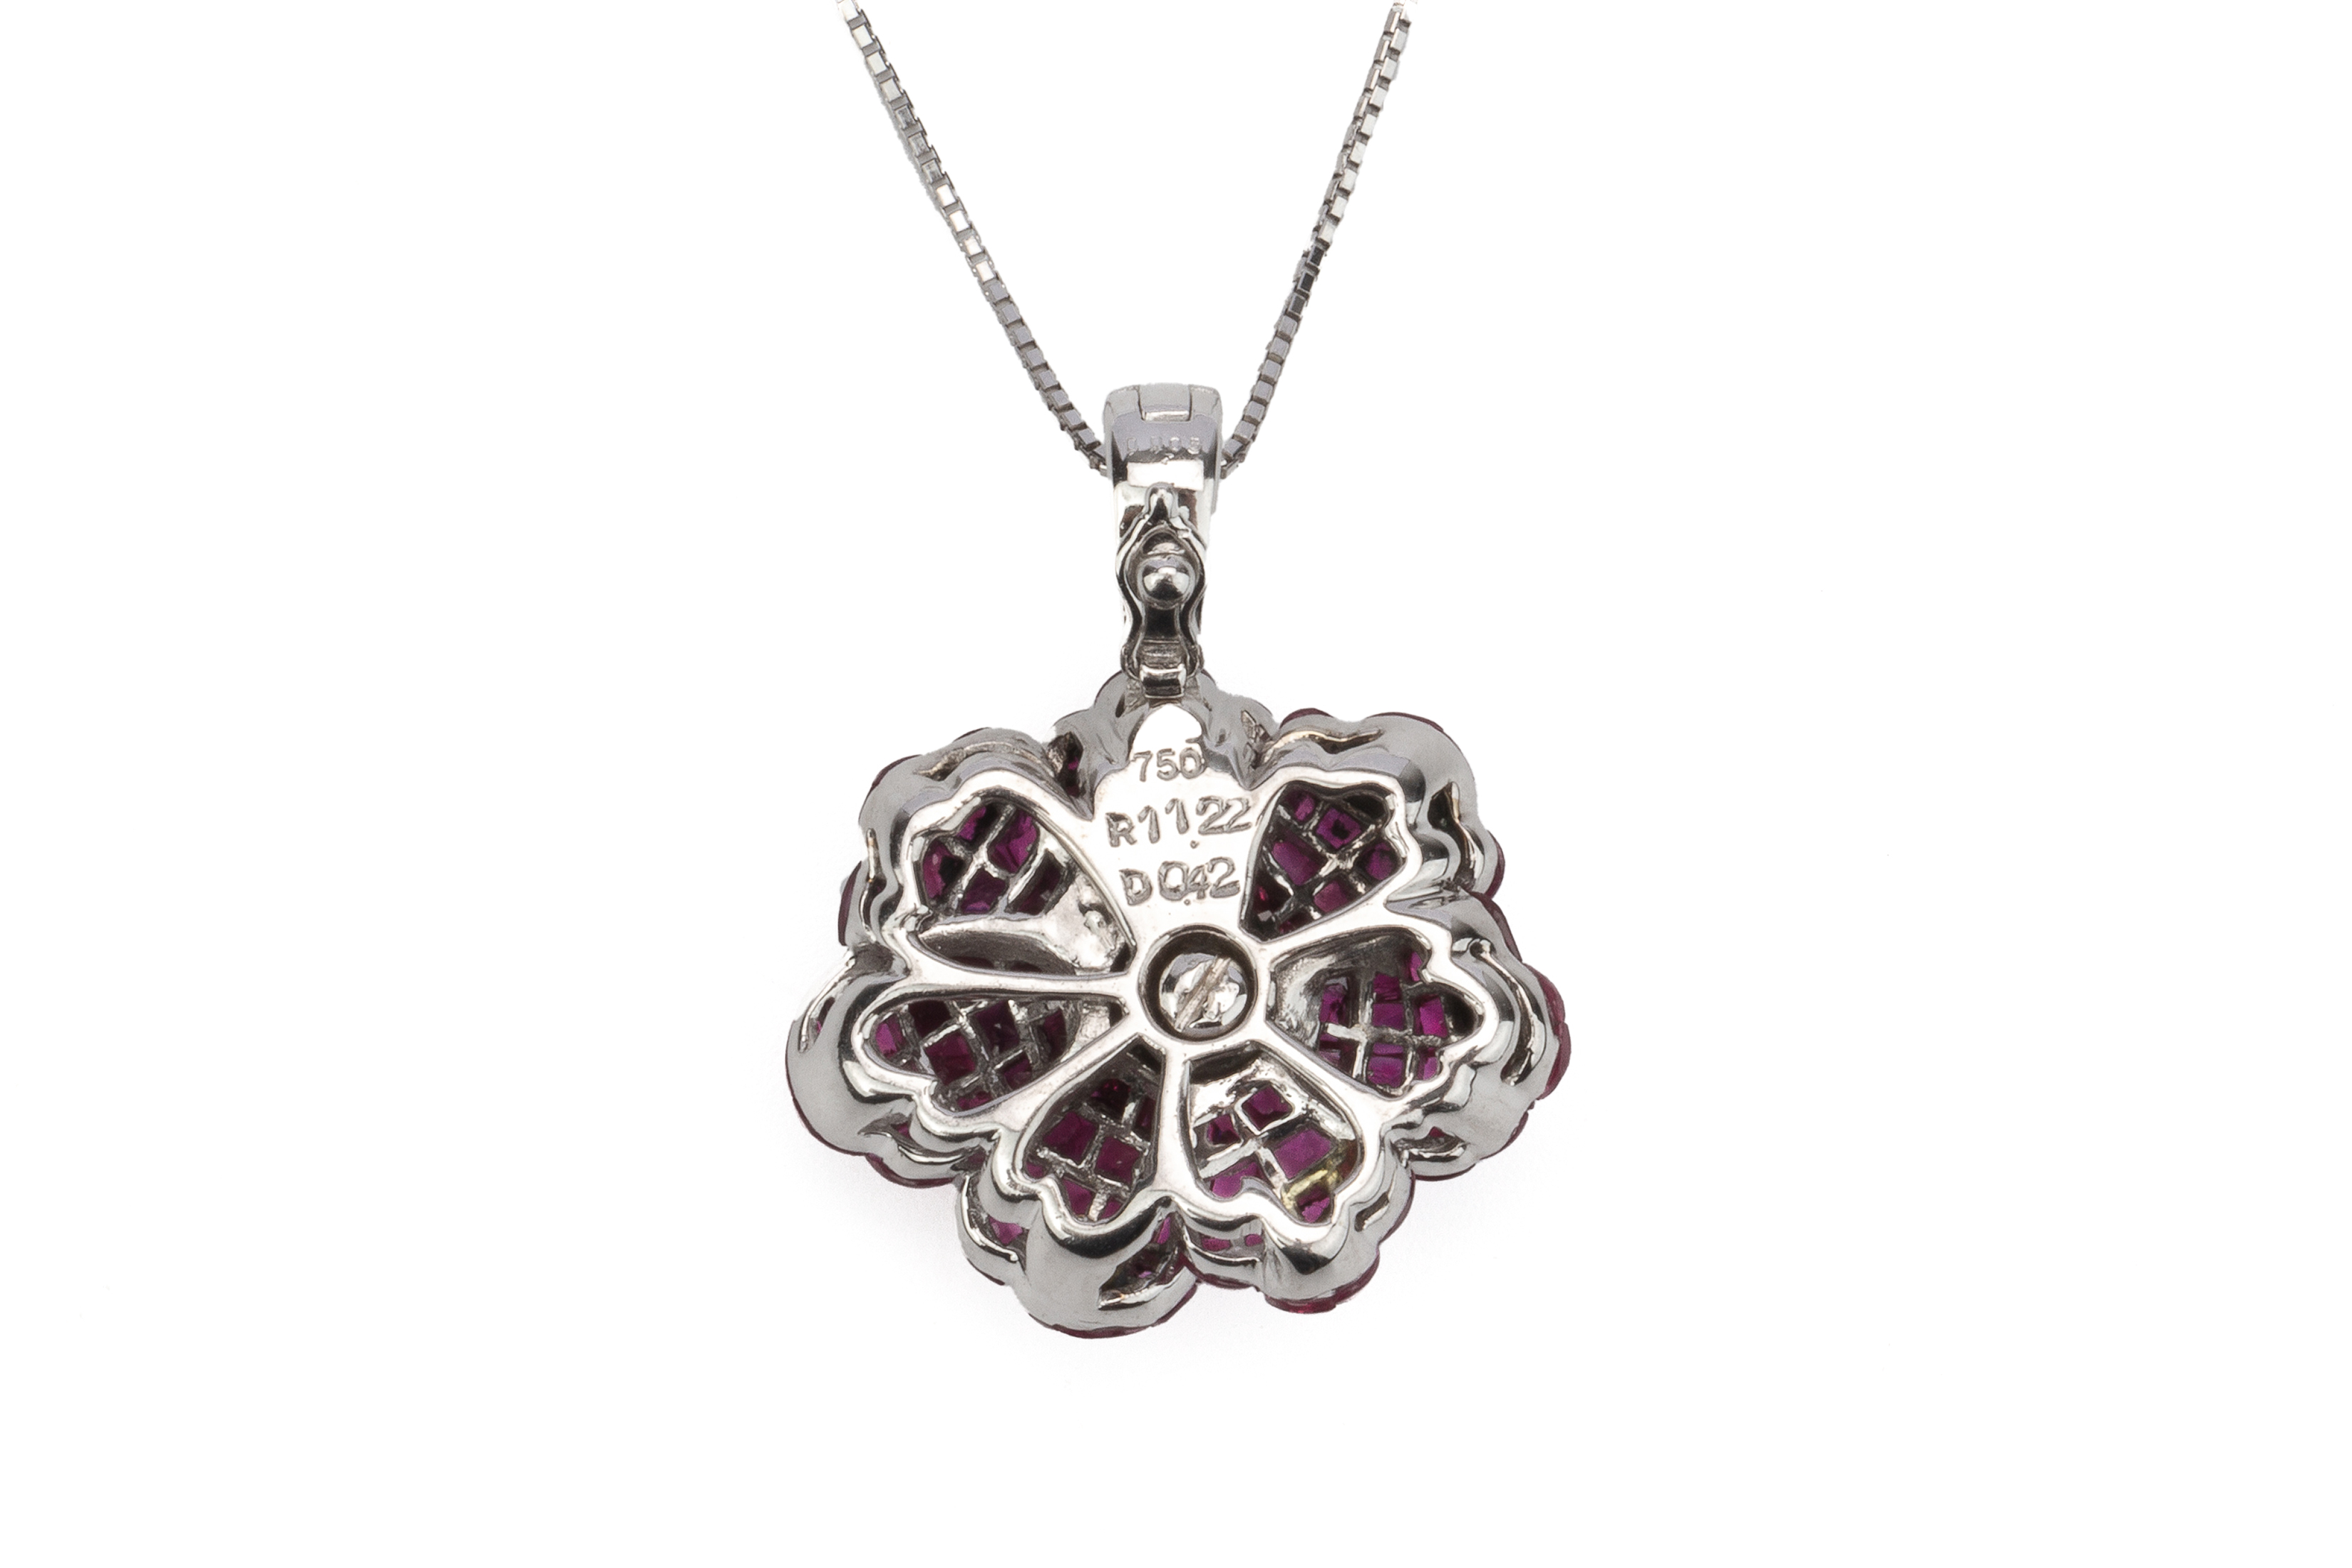 A RUBY AND DIAMOND PENDANT ON CHAIN - Image 2 of 2